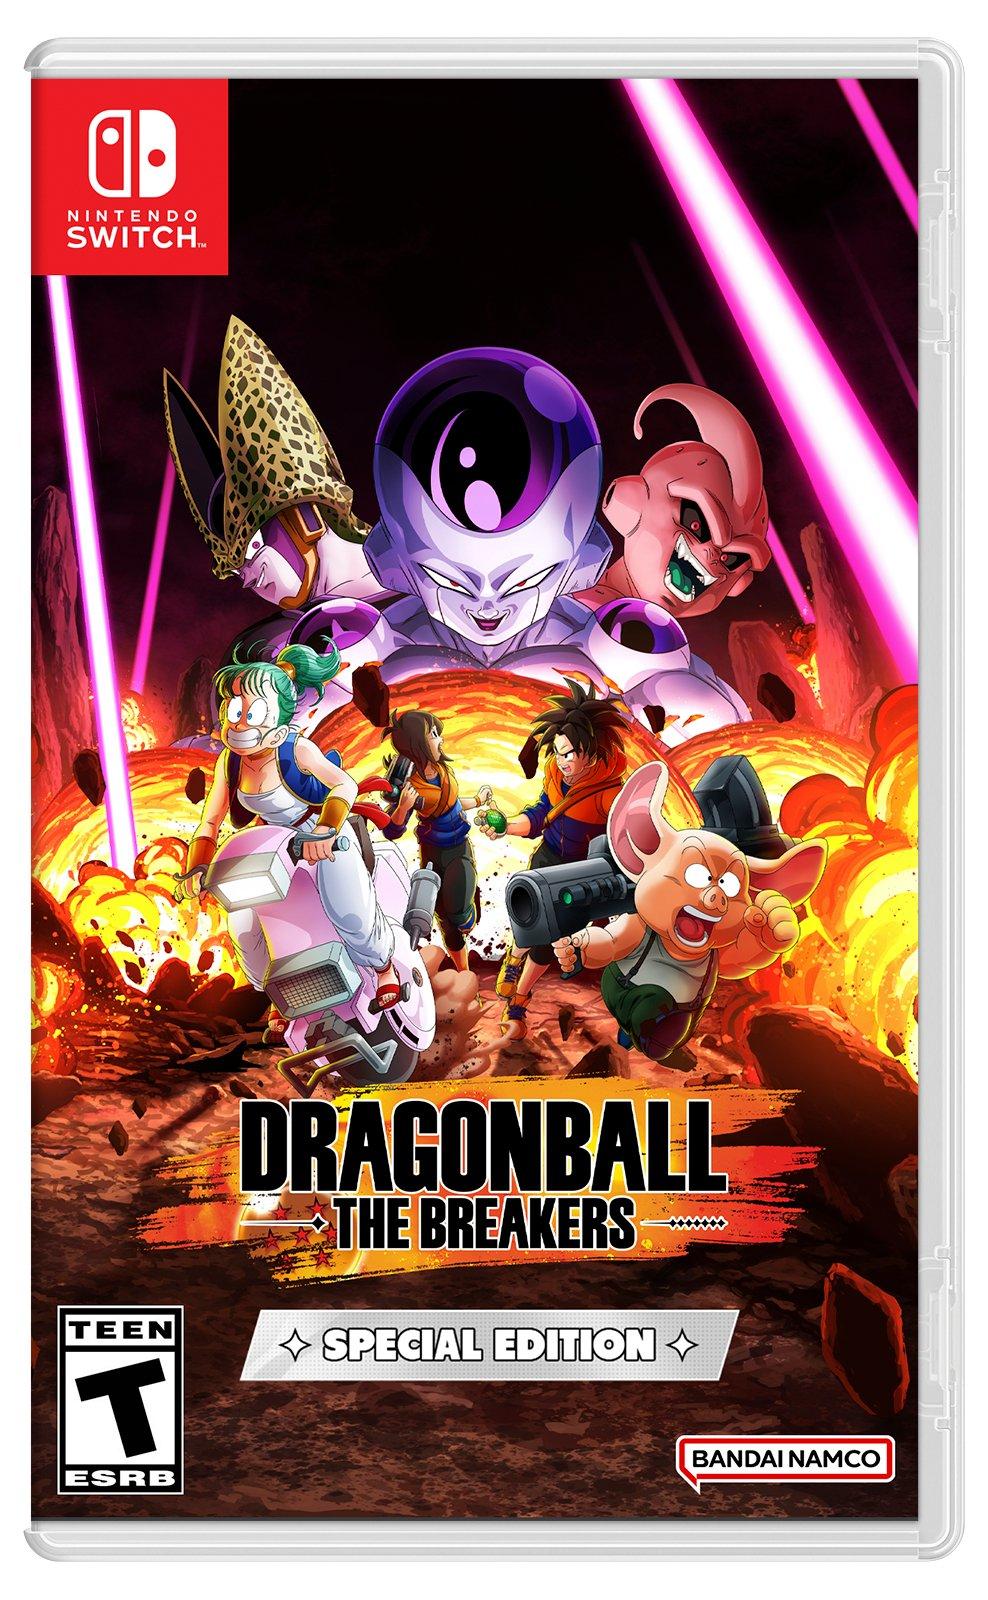 DRAGON BALL: THE BREAKERS - Cooperating with your teammates